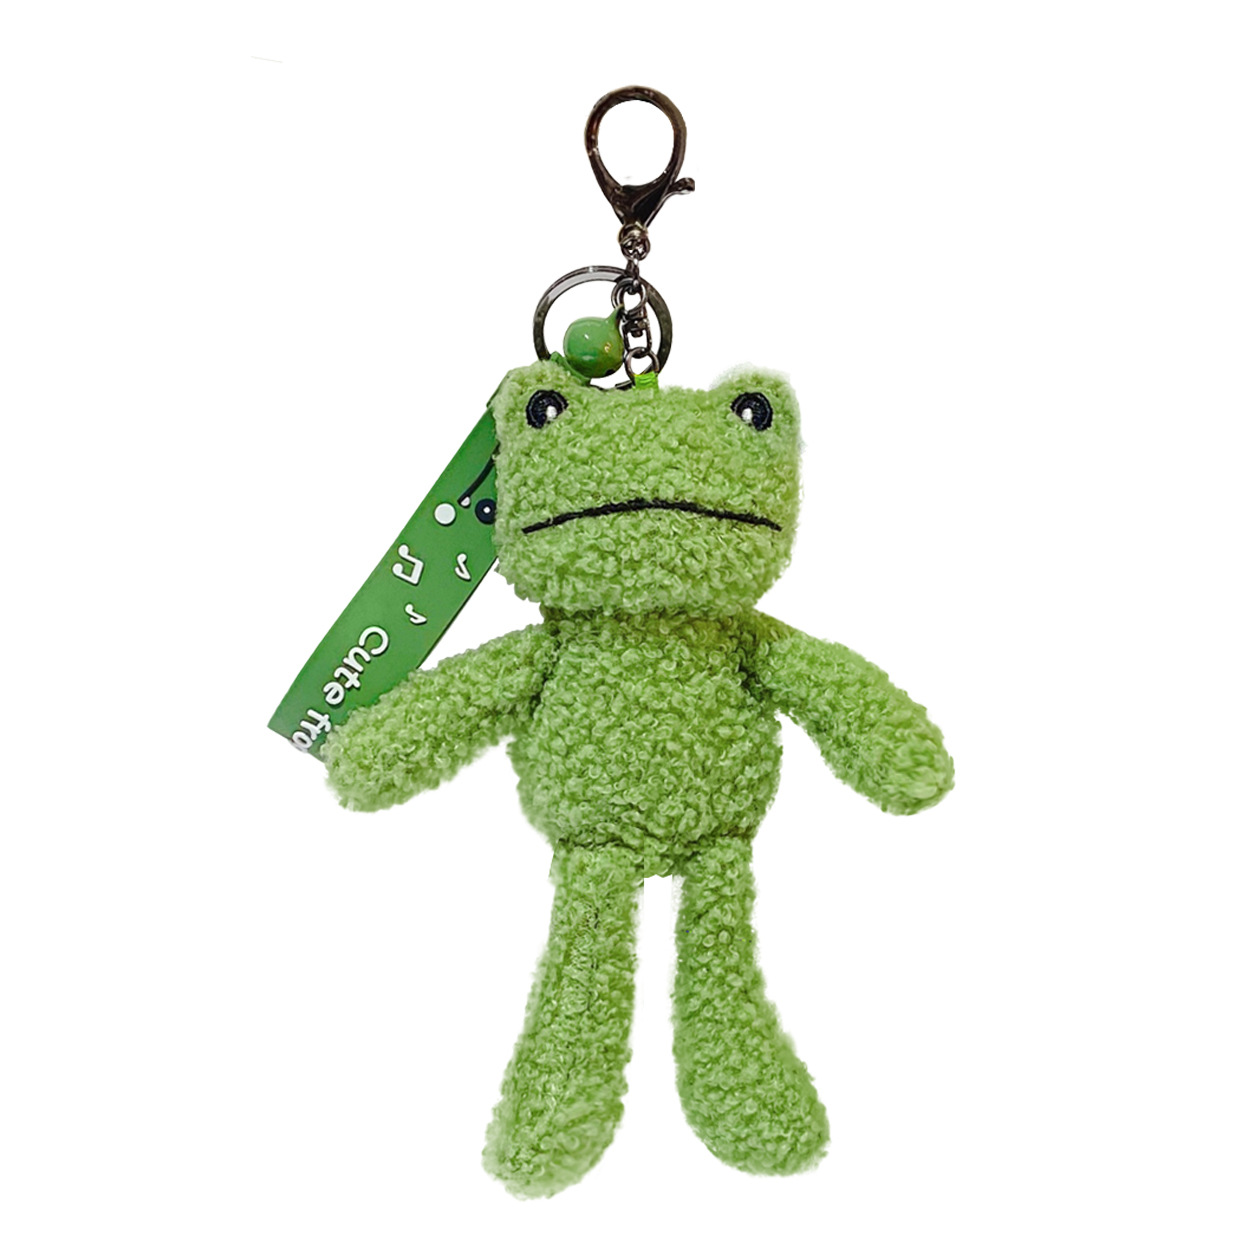 Genuine Online Red Frog Figurine Doll Pendant Bag Schoolbag Pendant Women's Exquisite High Quality Plush Key Chain